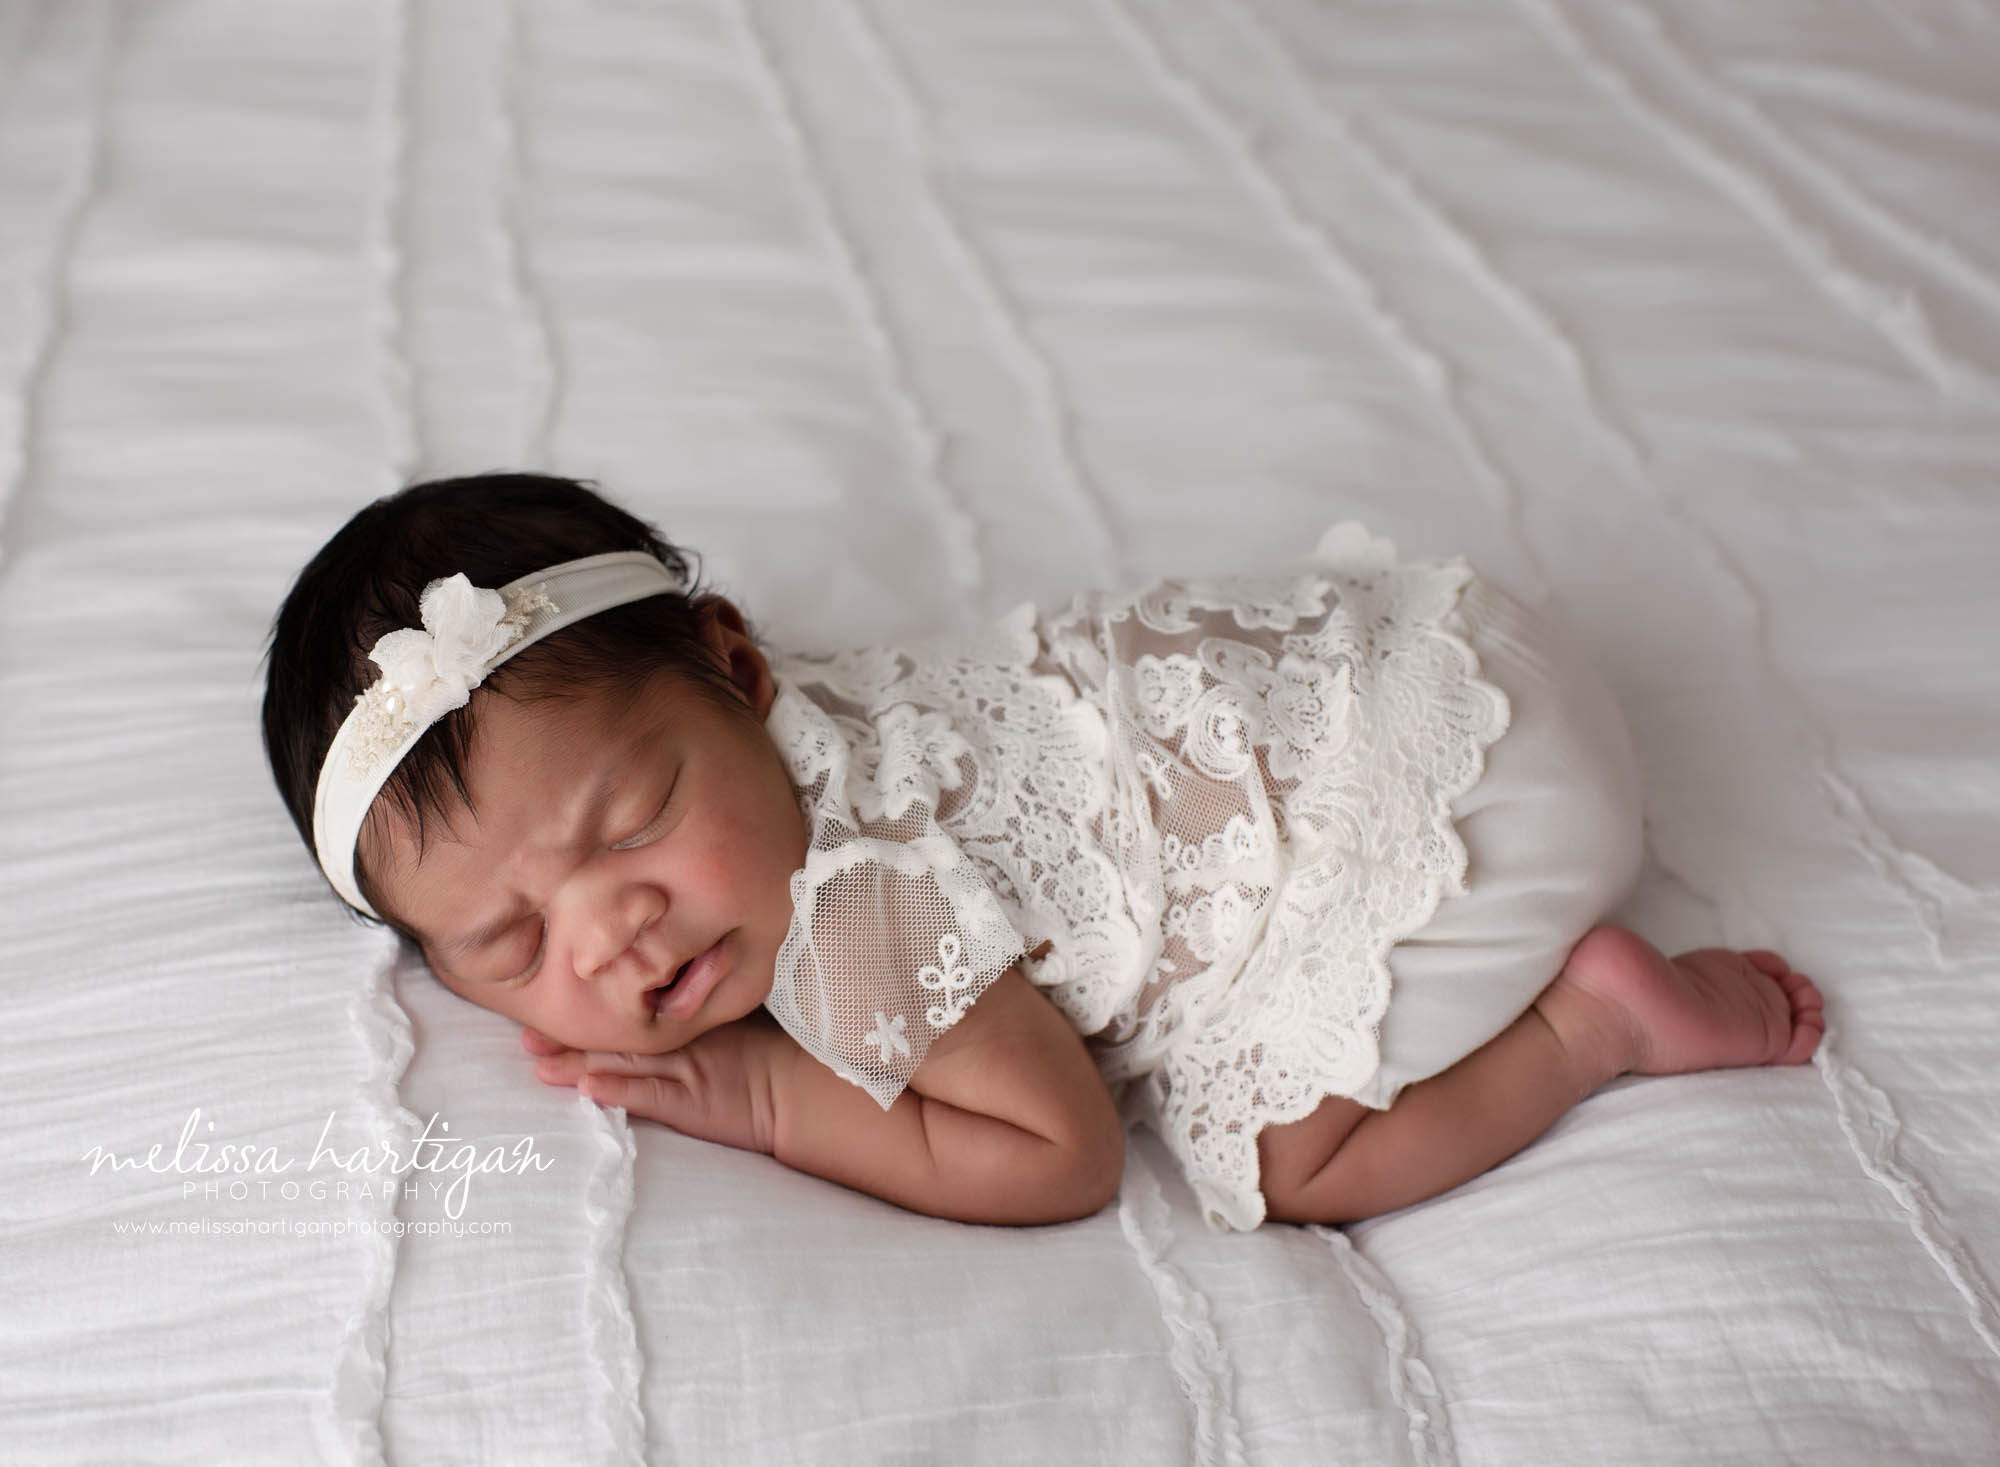 baby girl posed on white bed wearing lacey cream outfit and headband